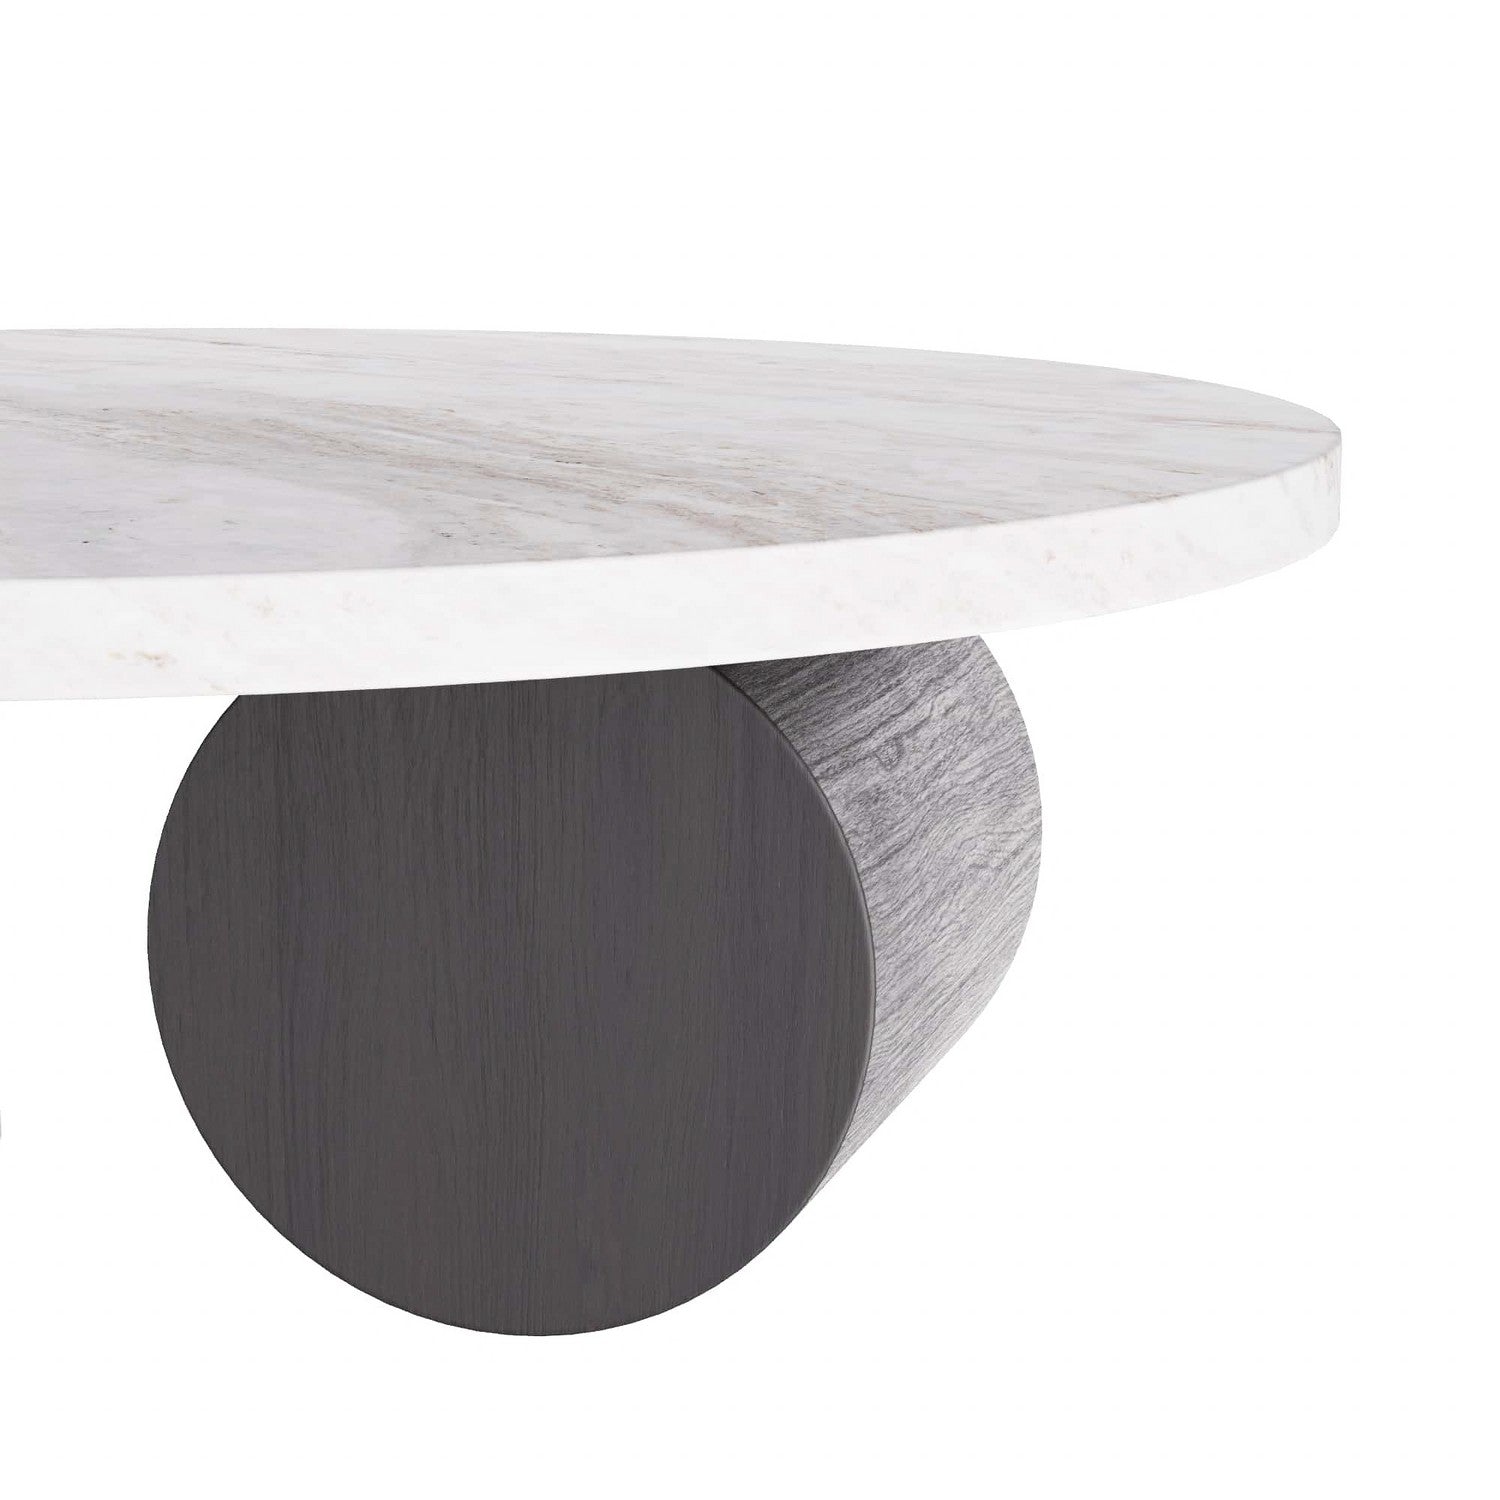 Coffee Table from the Torrington collection in Toronto finish